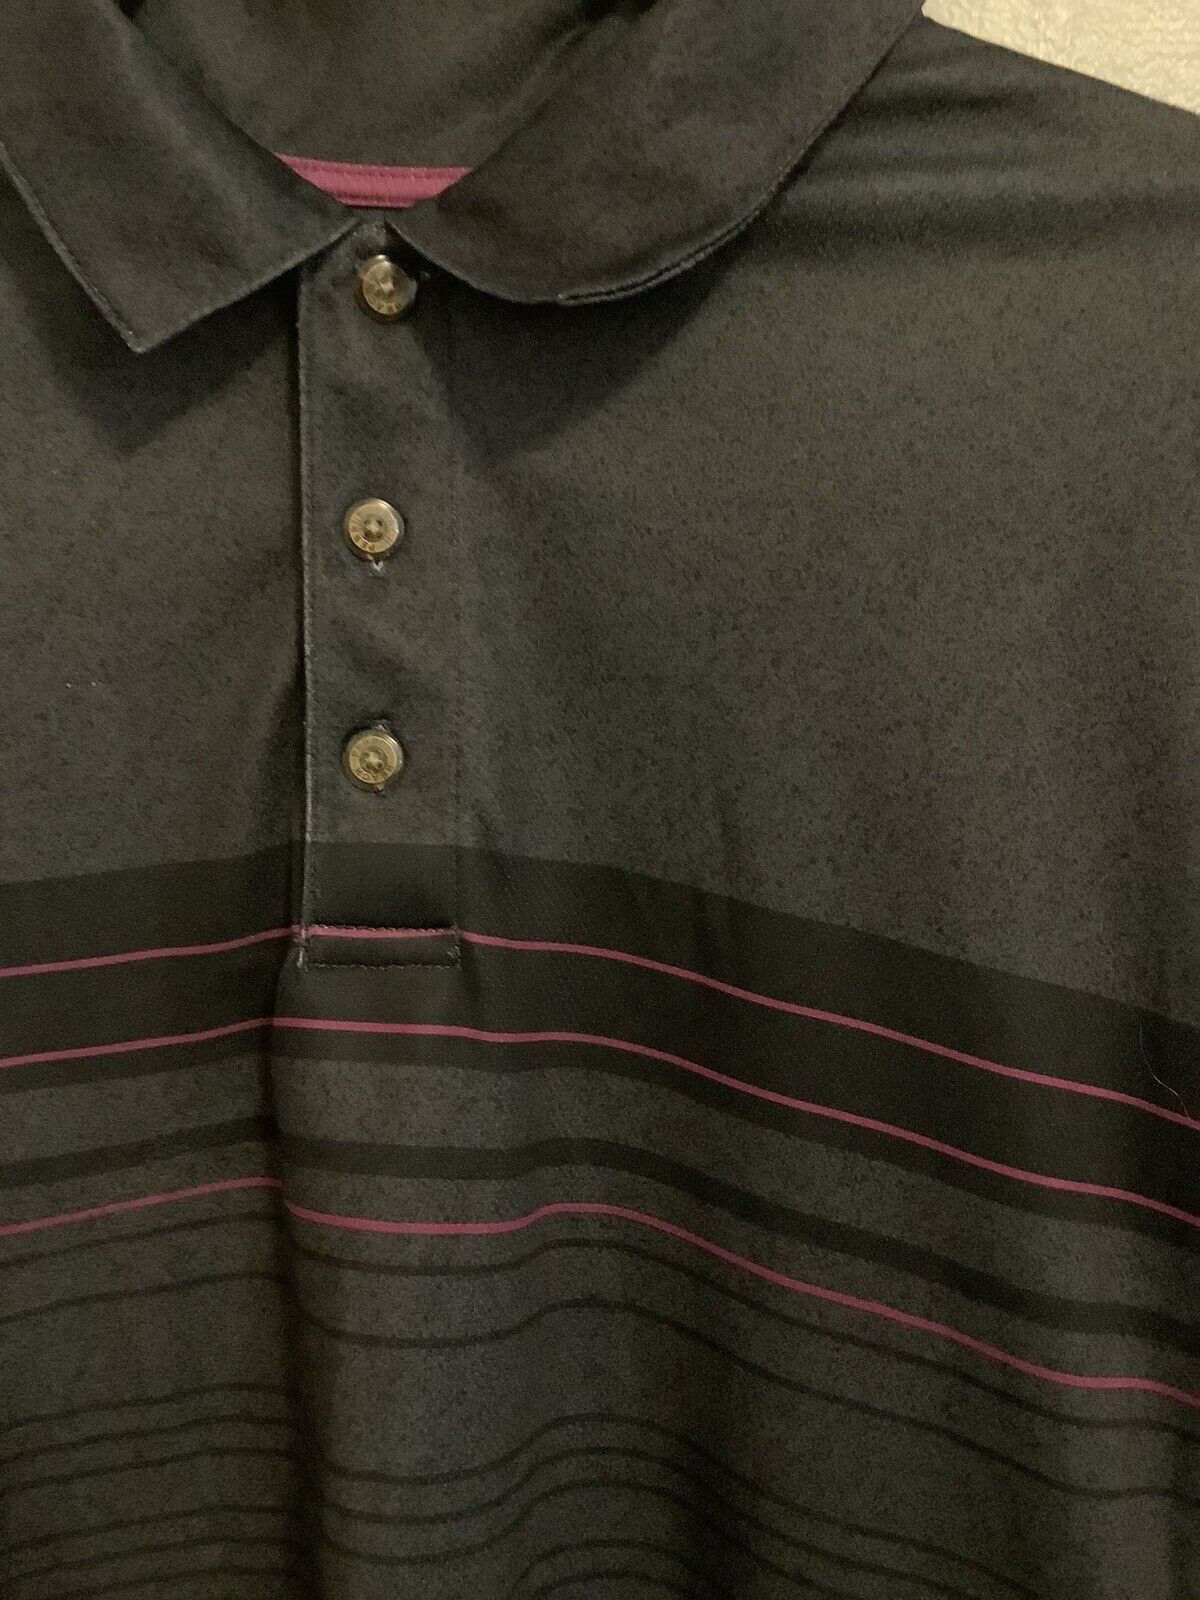 Pebble Beach Dry-Luxe Performance Polo Size M Multicolor 5F